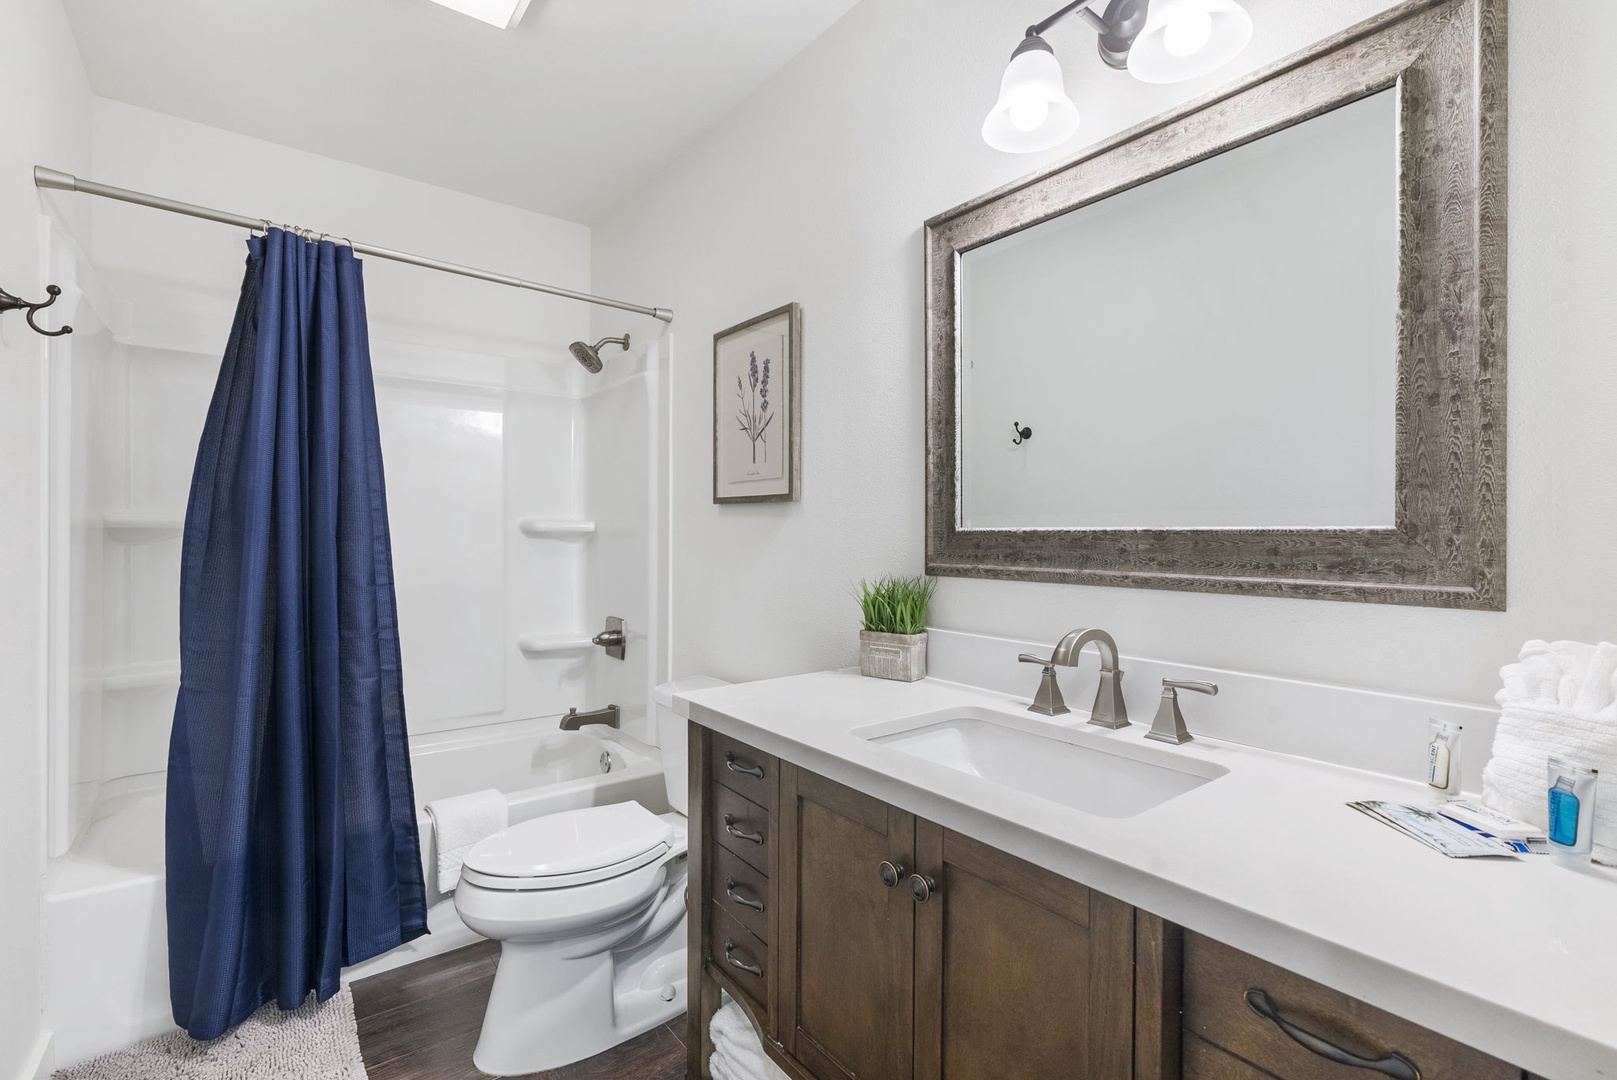 This full bathroom includes an oversized single vanity & shower/tub combo